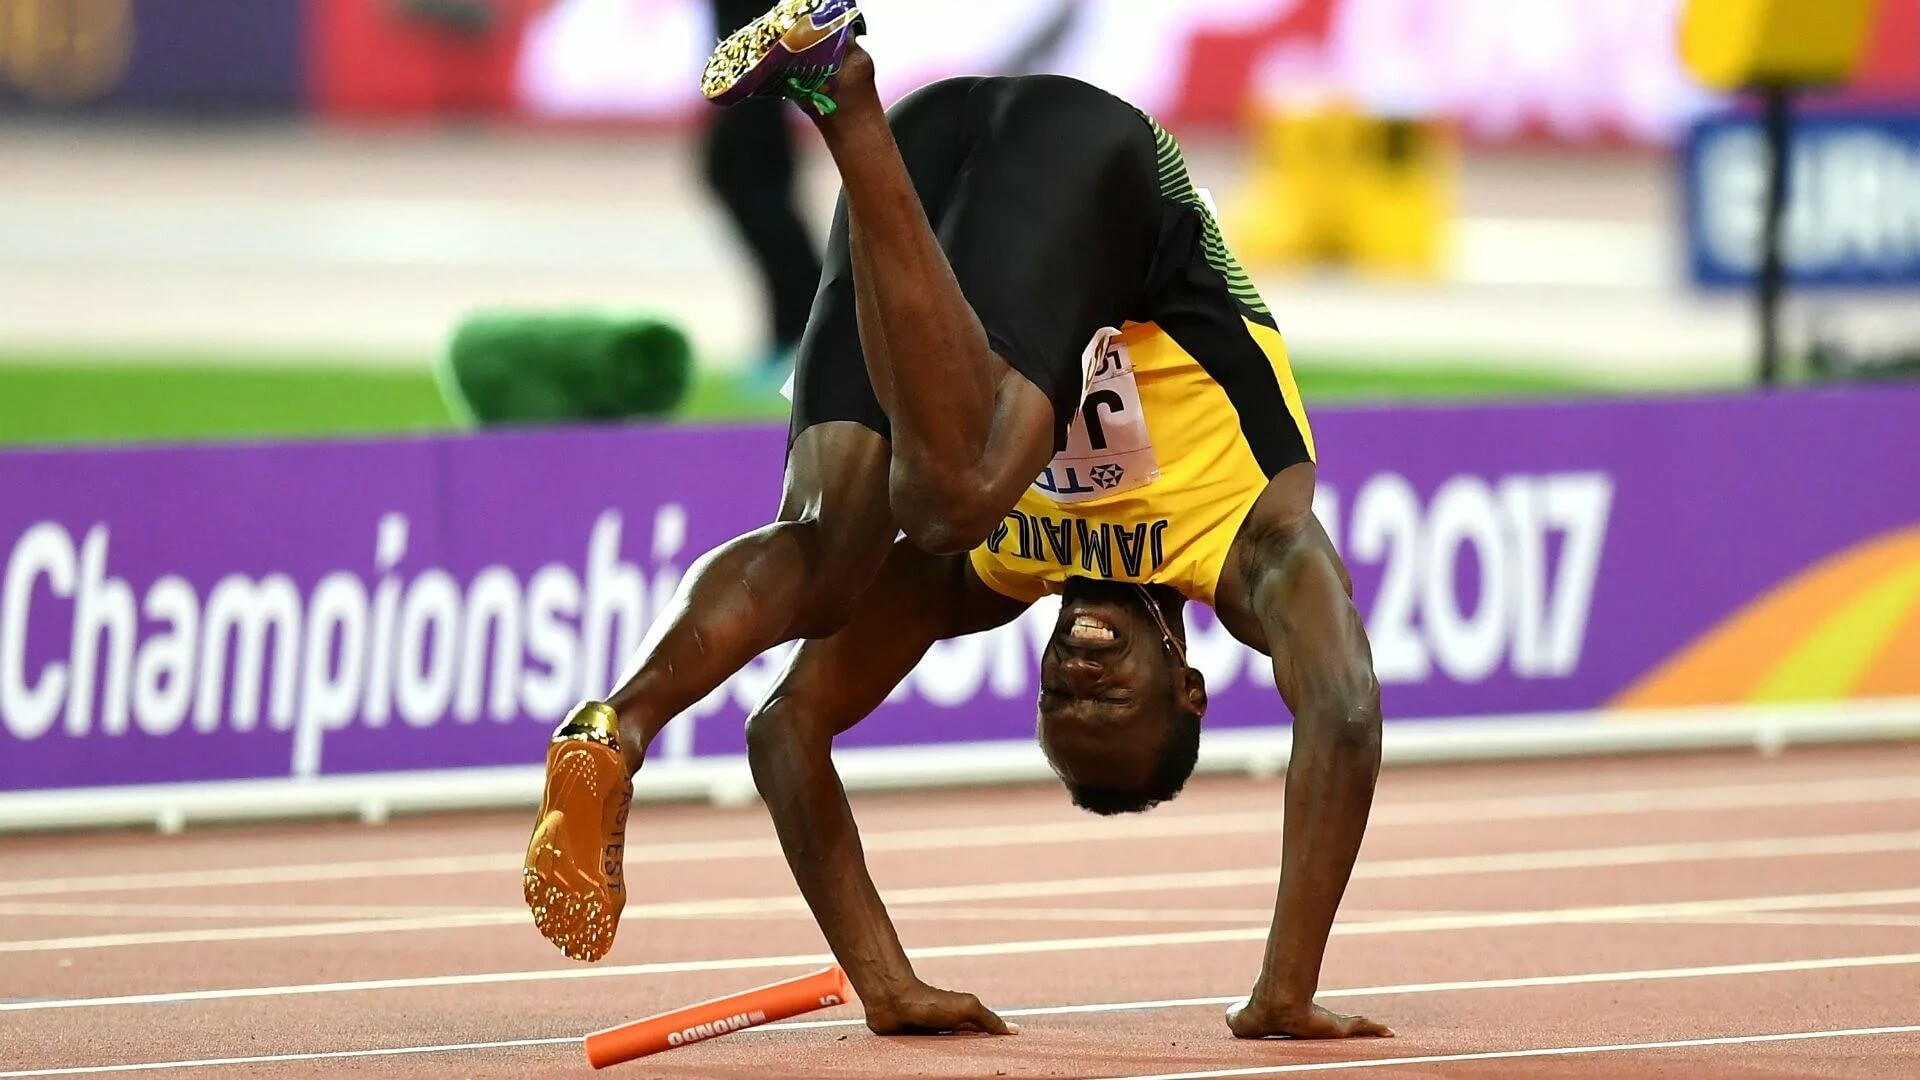 Usain Bolt: He broke new ground, winning in 9.69 s In the Beijing 2008 Olympic 100 m final. 1920x1080 Full HD Background.